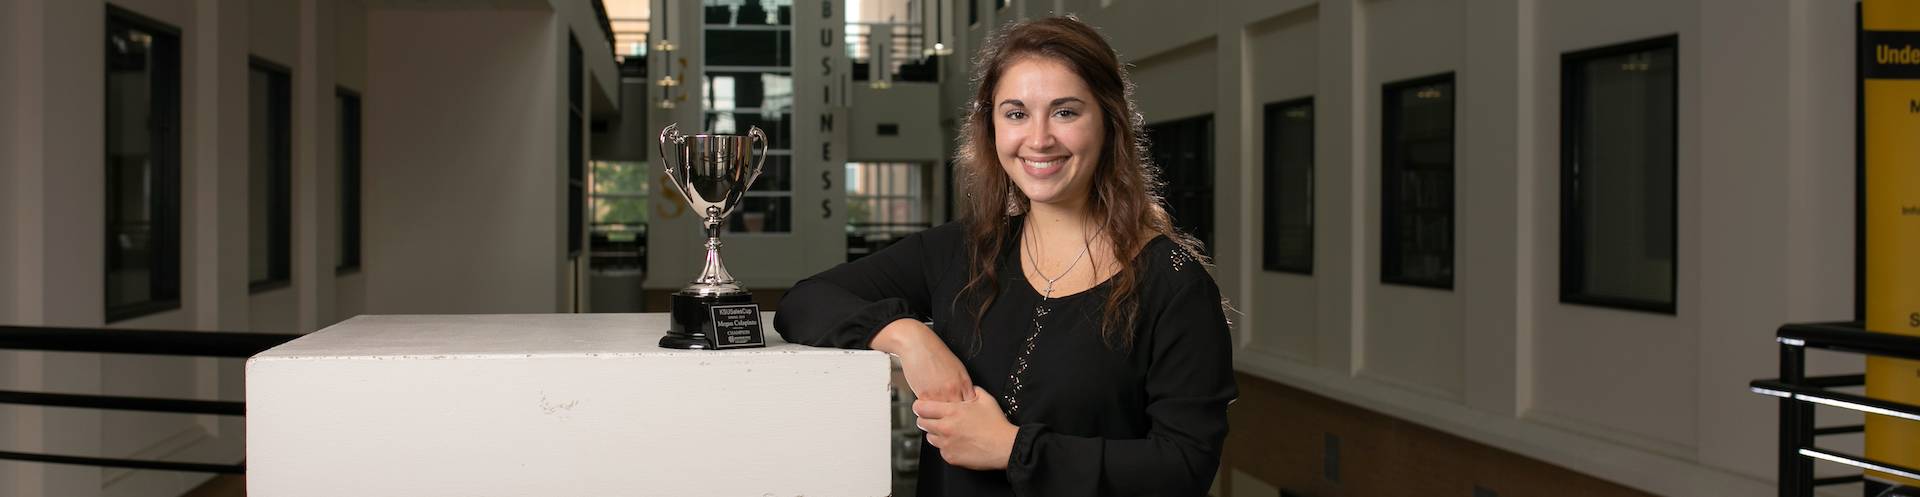 Megan Colapinto captained the KSU Sales Team, winning the KSU Sales Cup competition four consecutive times